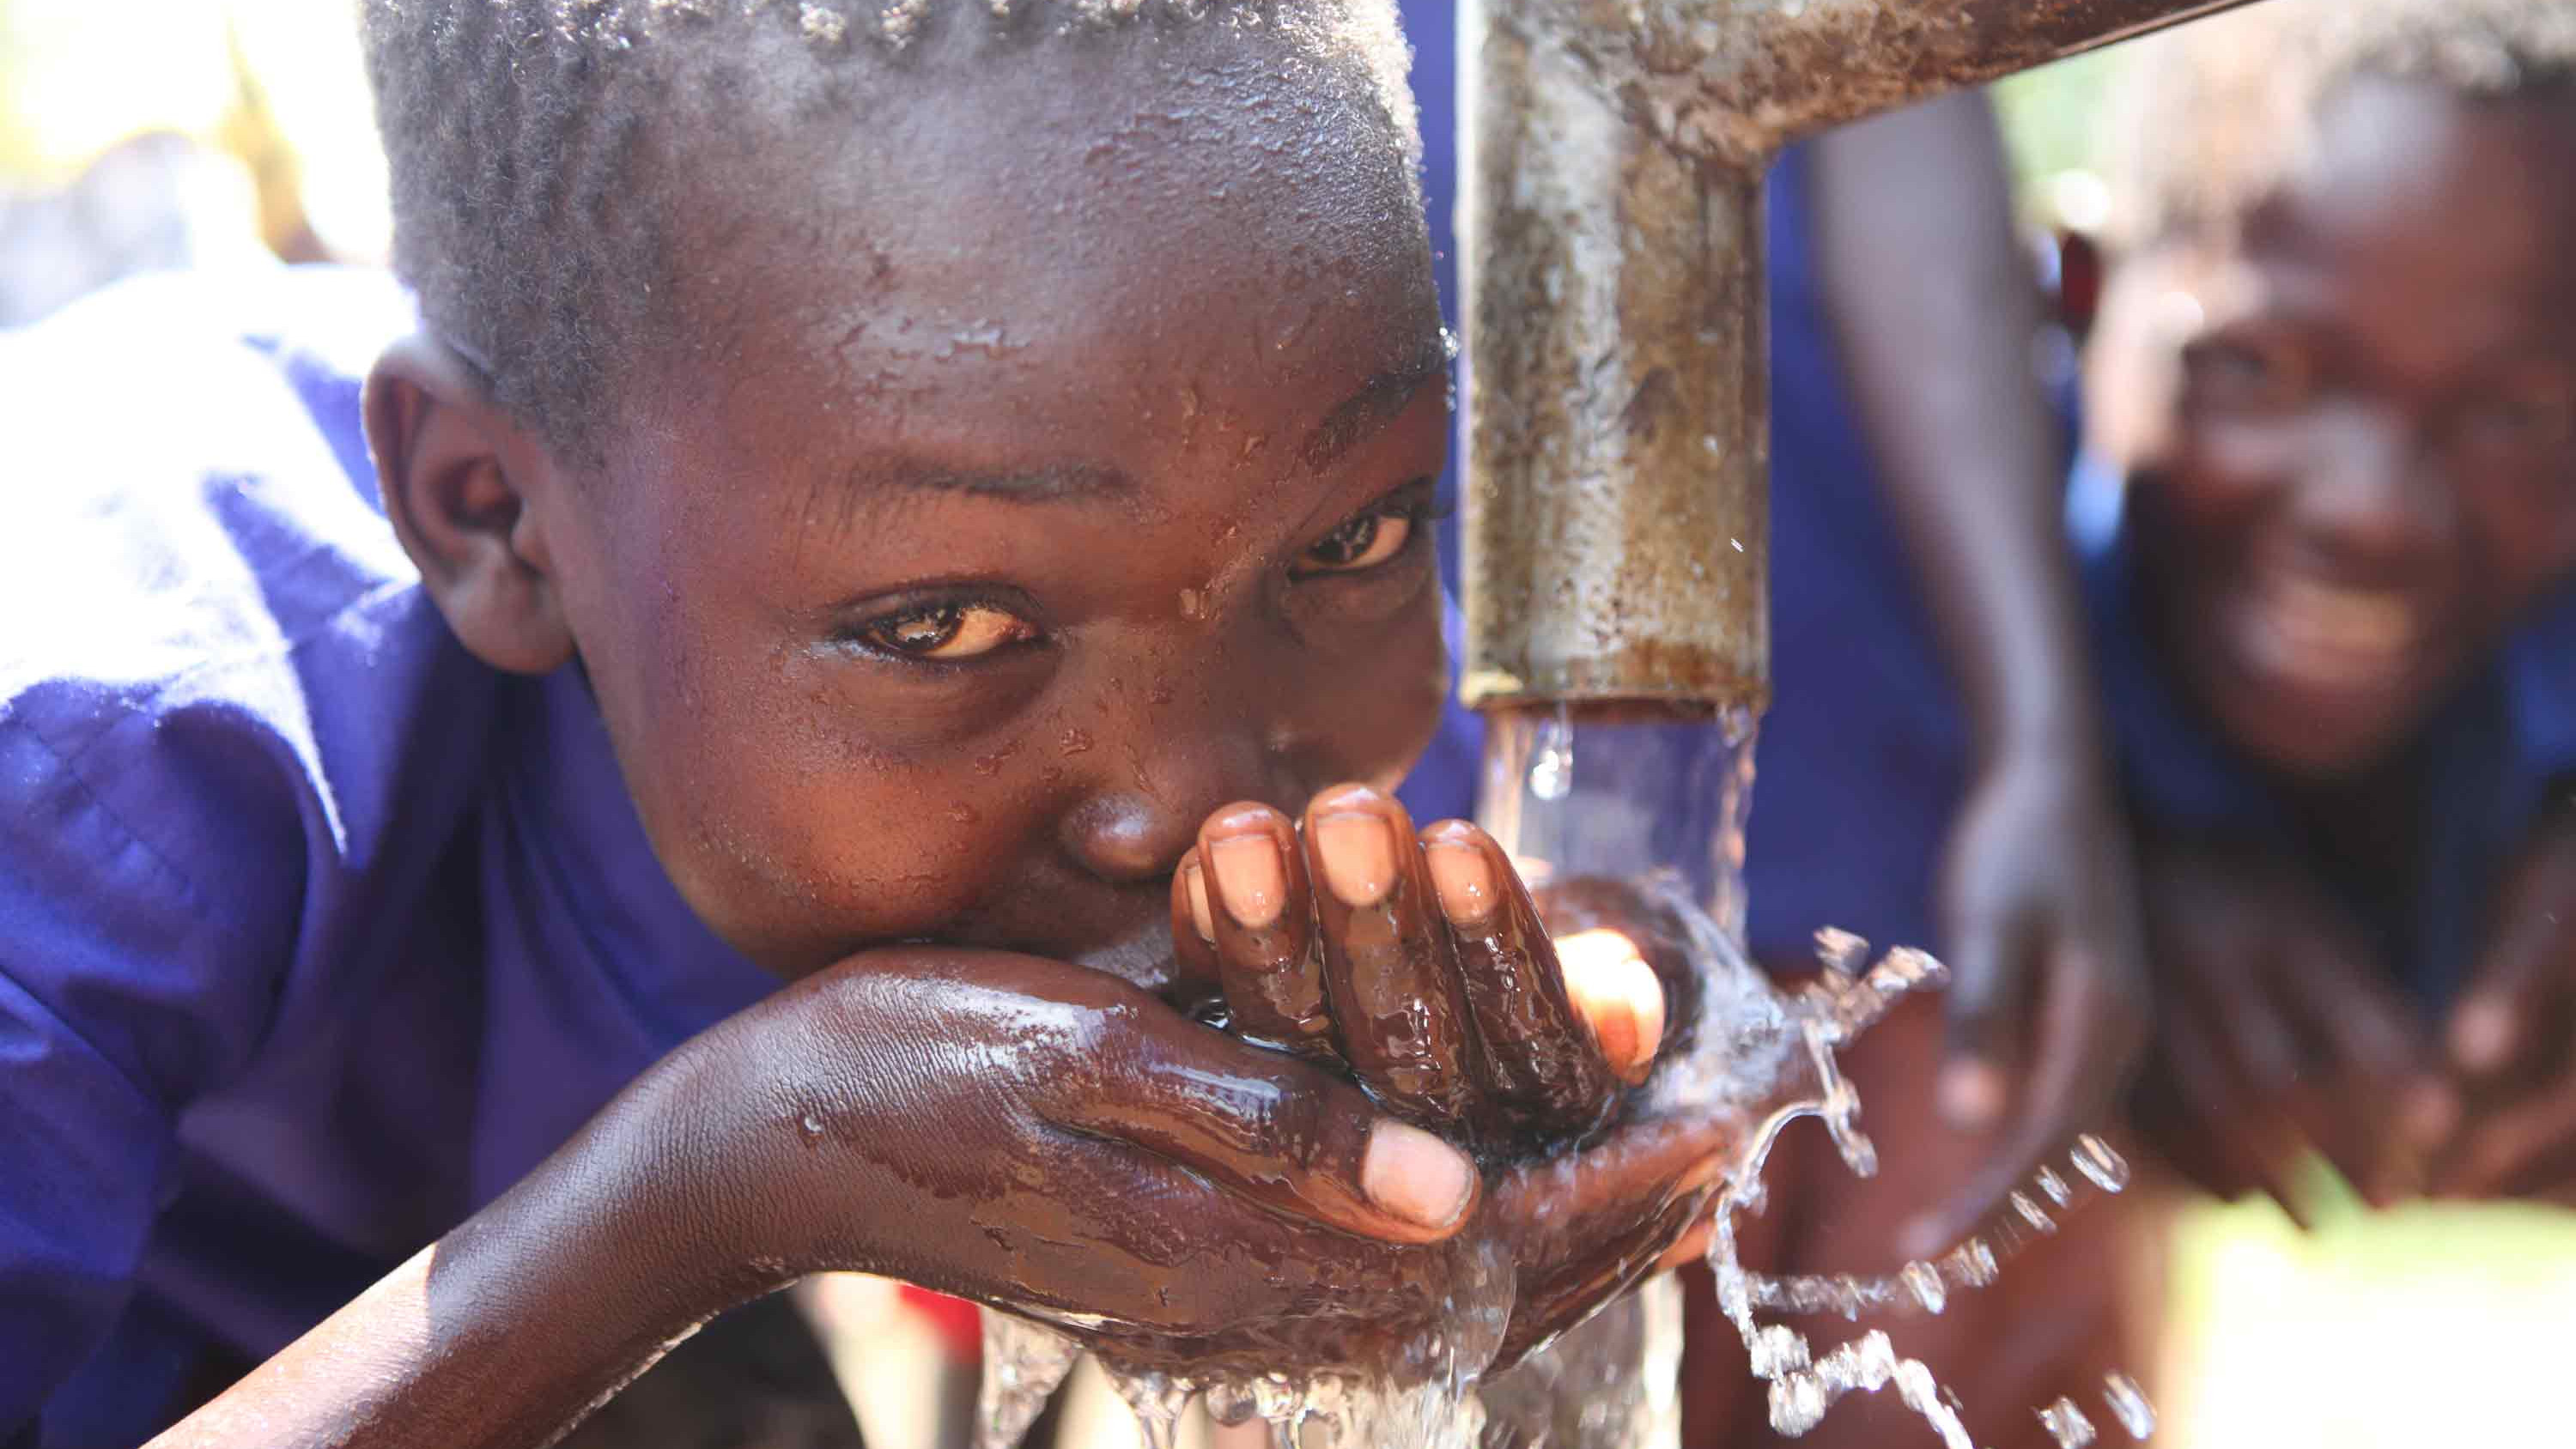 A boy in South Sudan drinks clean water from a well.